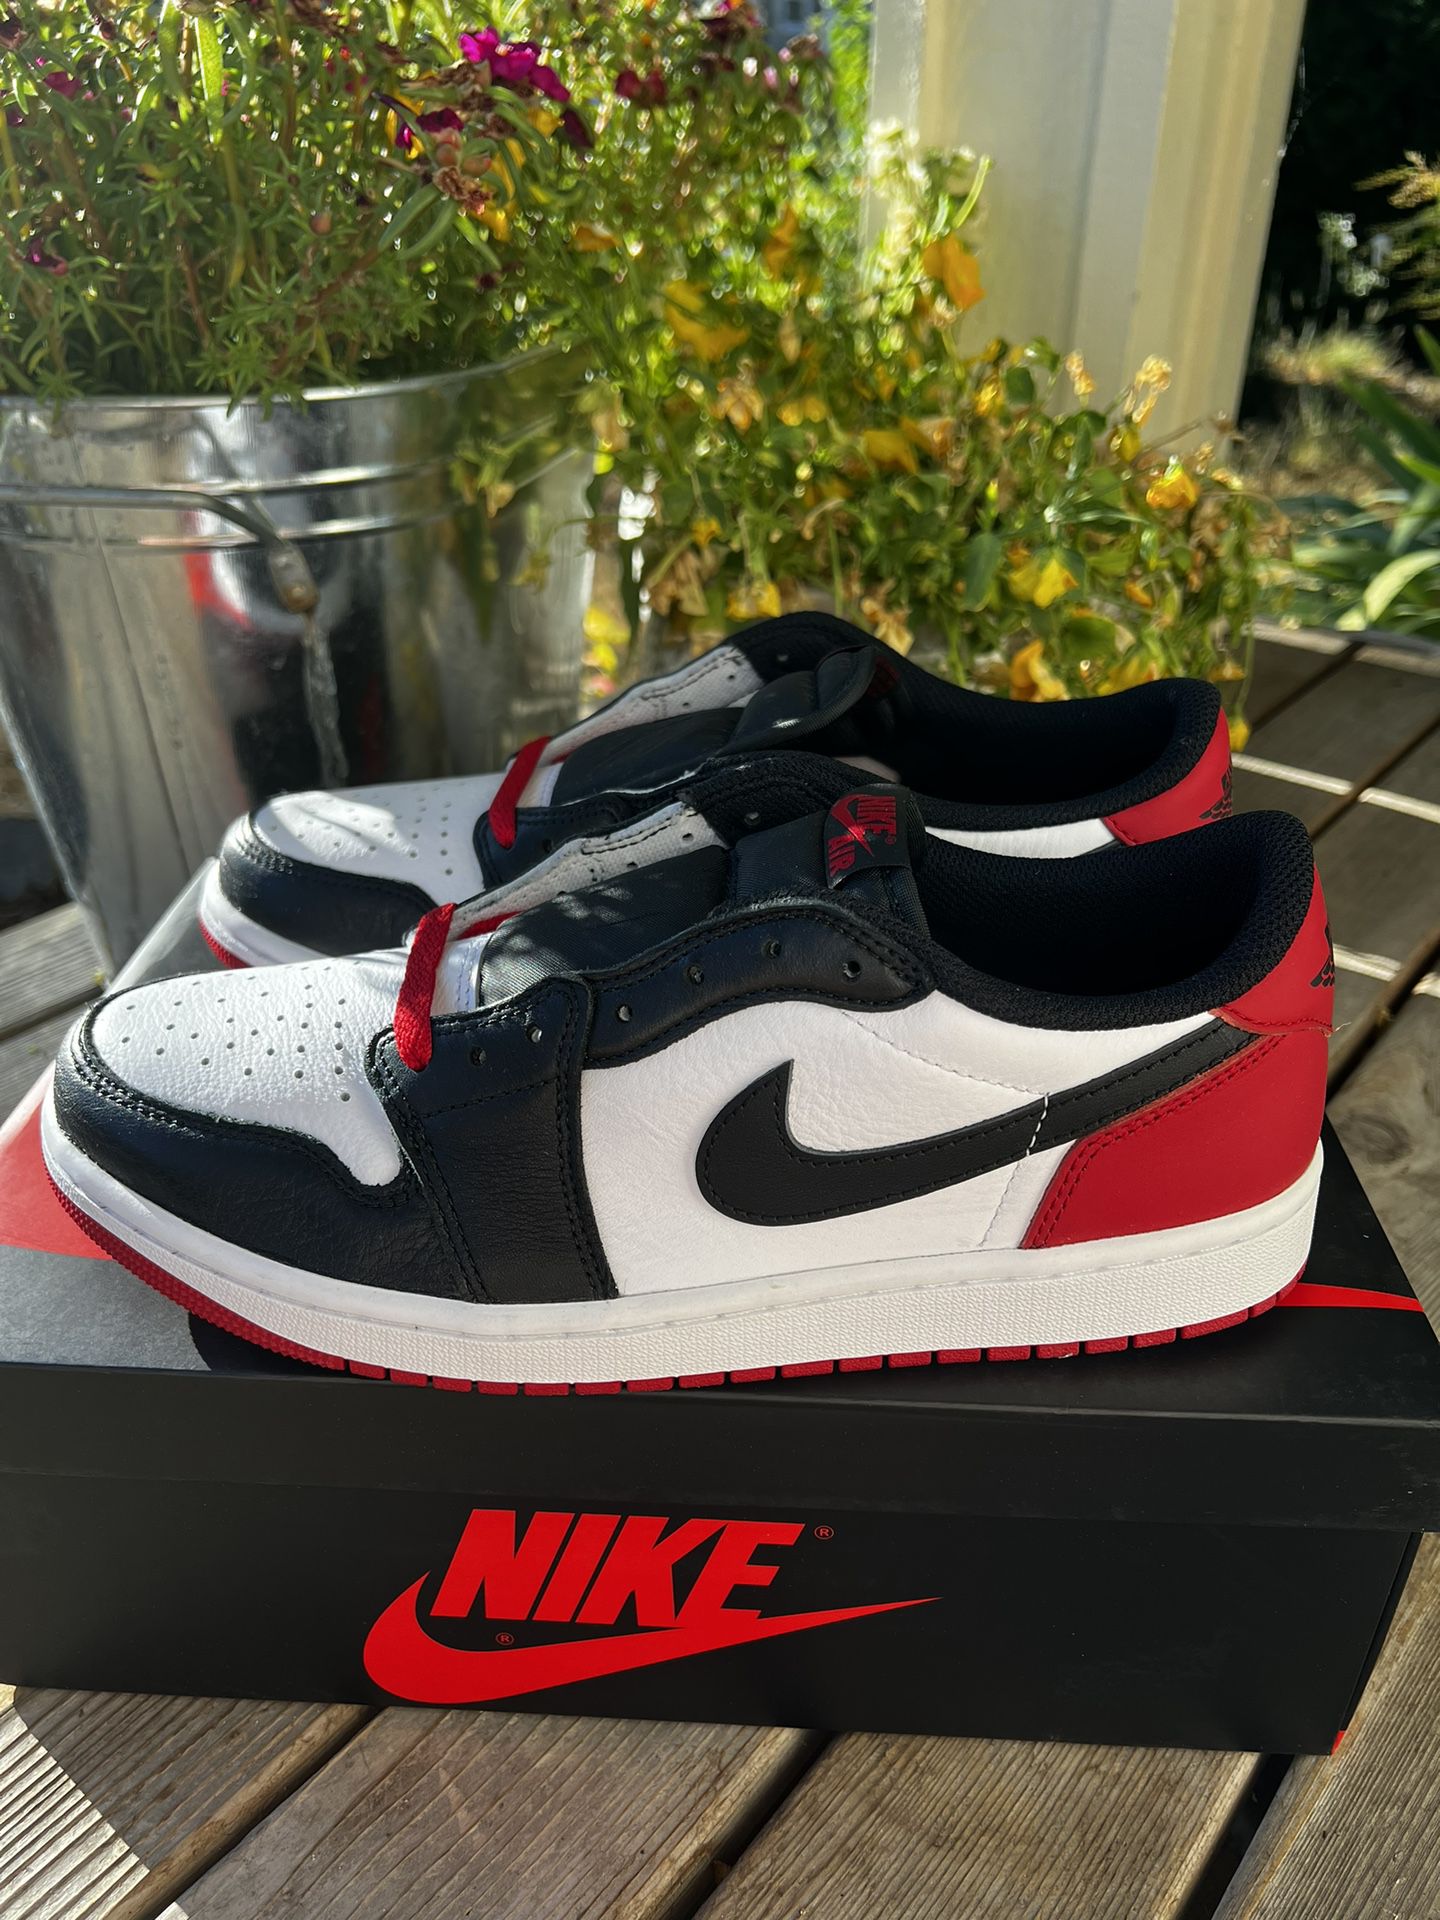 Jordan 1 High OG Strap Olympic Size 10 for Sale in Tacoma, WA - OfferUp